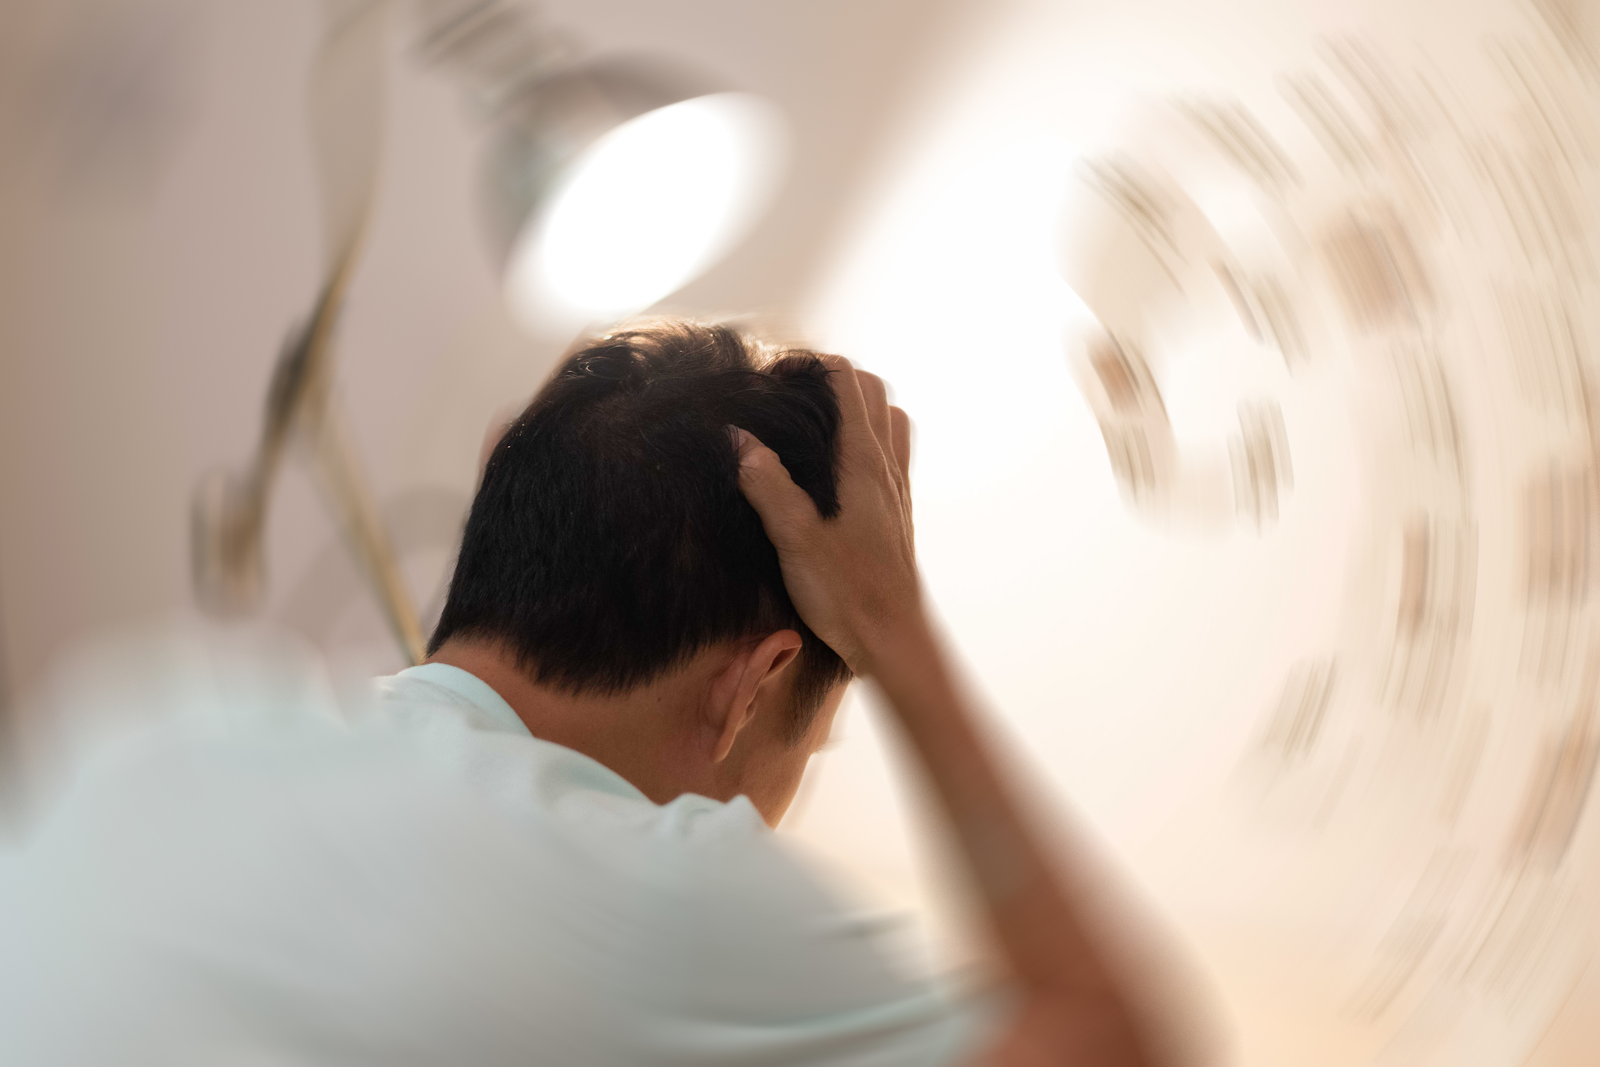 concussion symptoms from a car accident injury